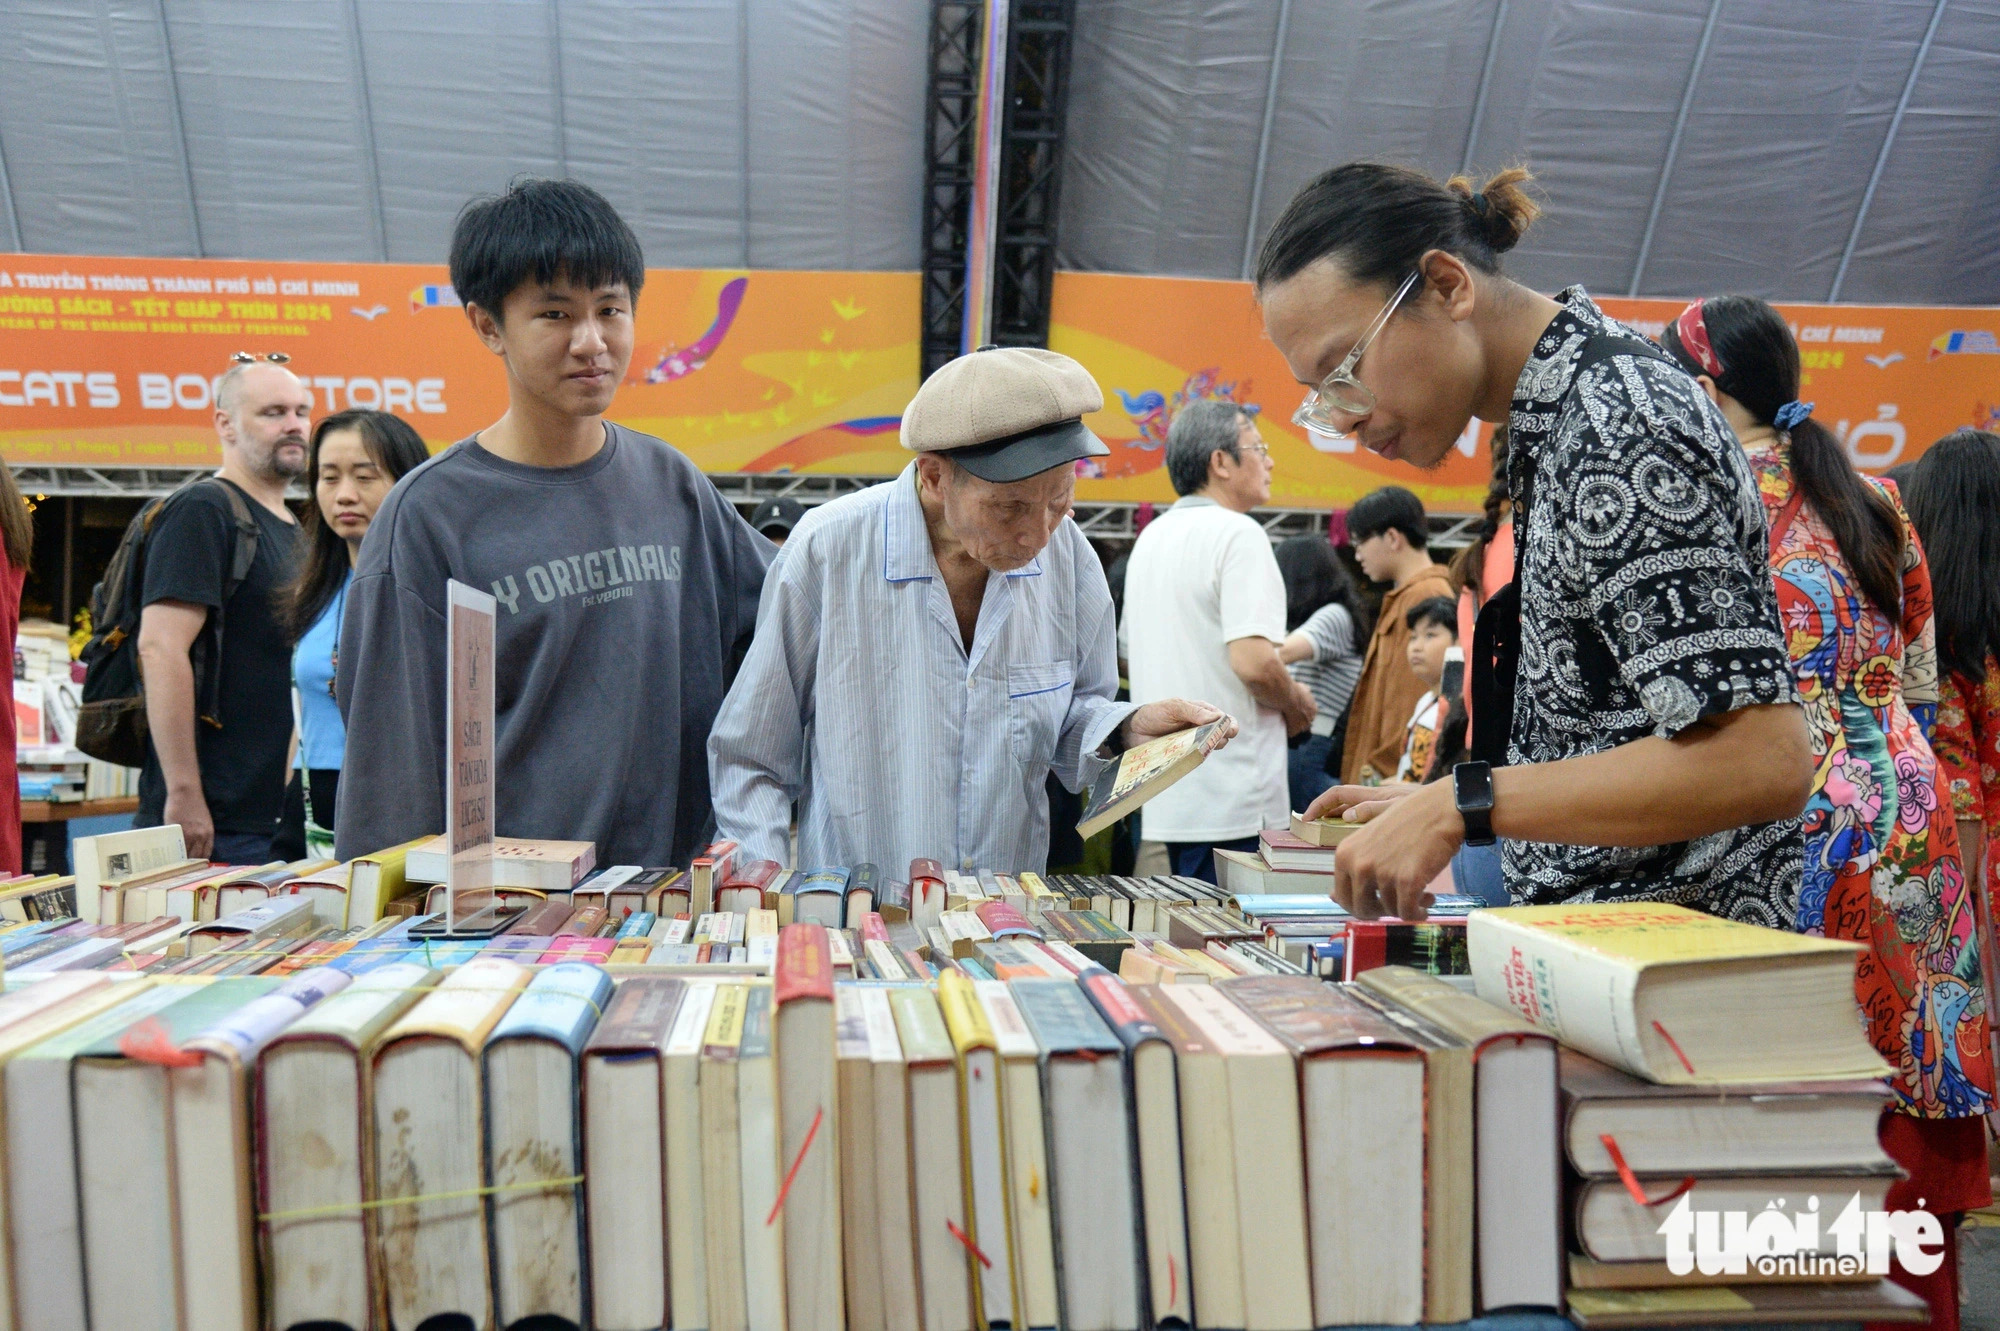 Over 16,000 books offered as Tet gifts at Ho Chi Minh City book festival